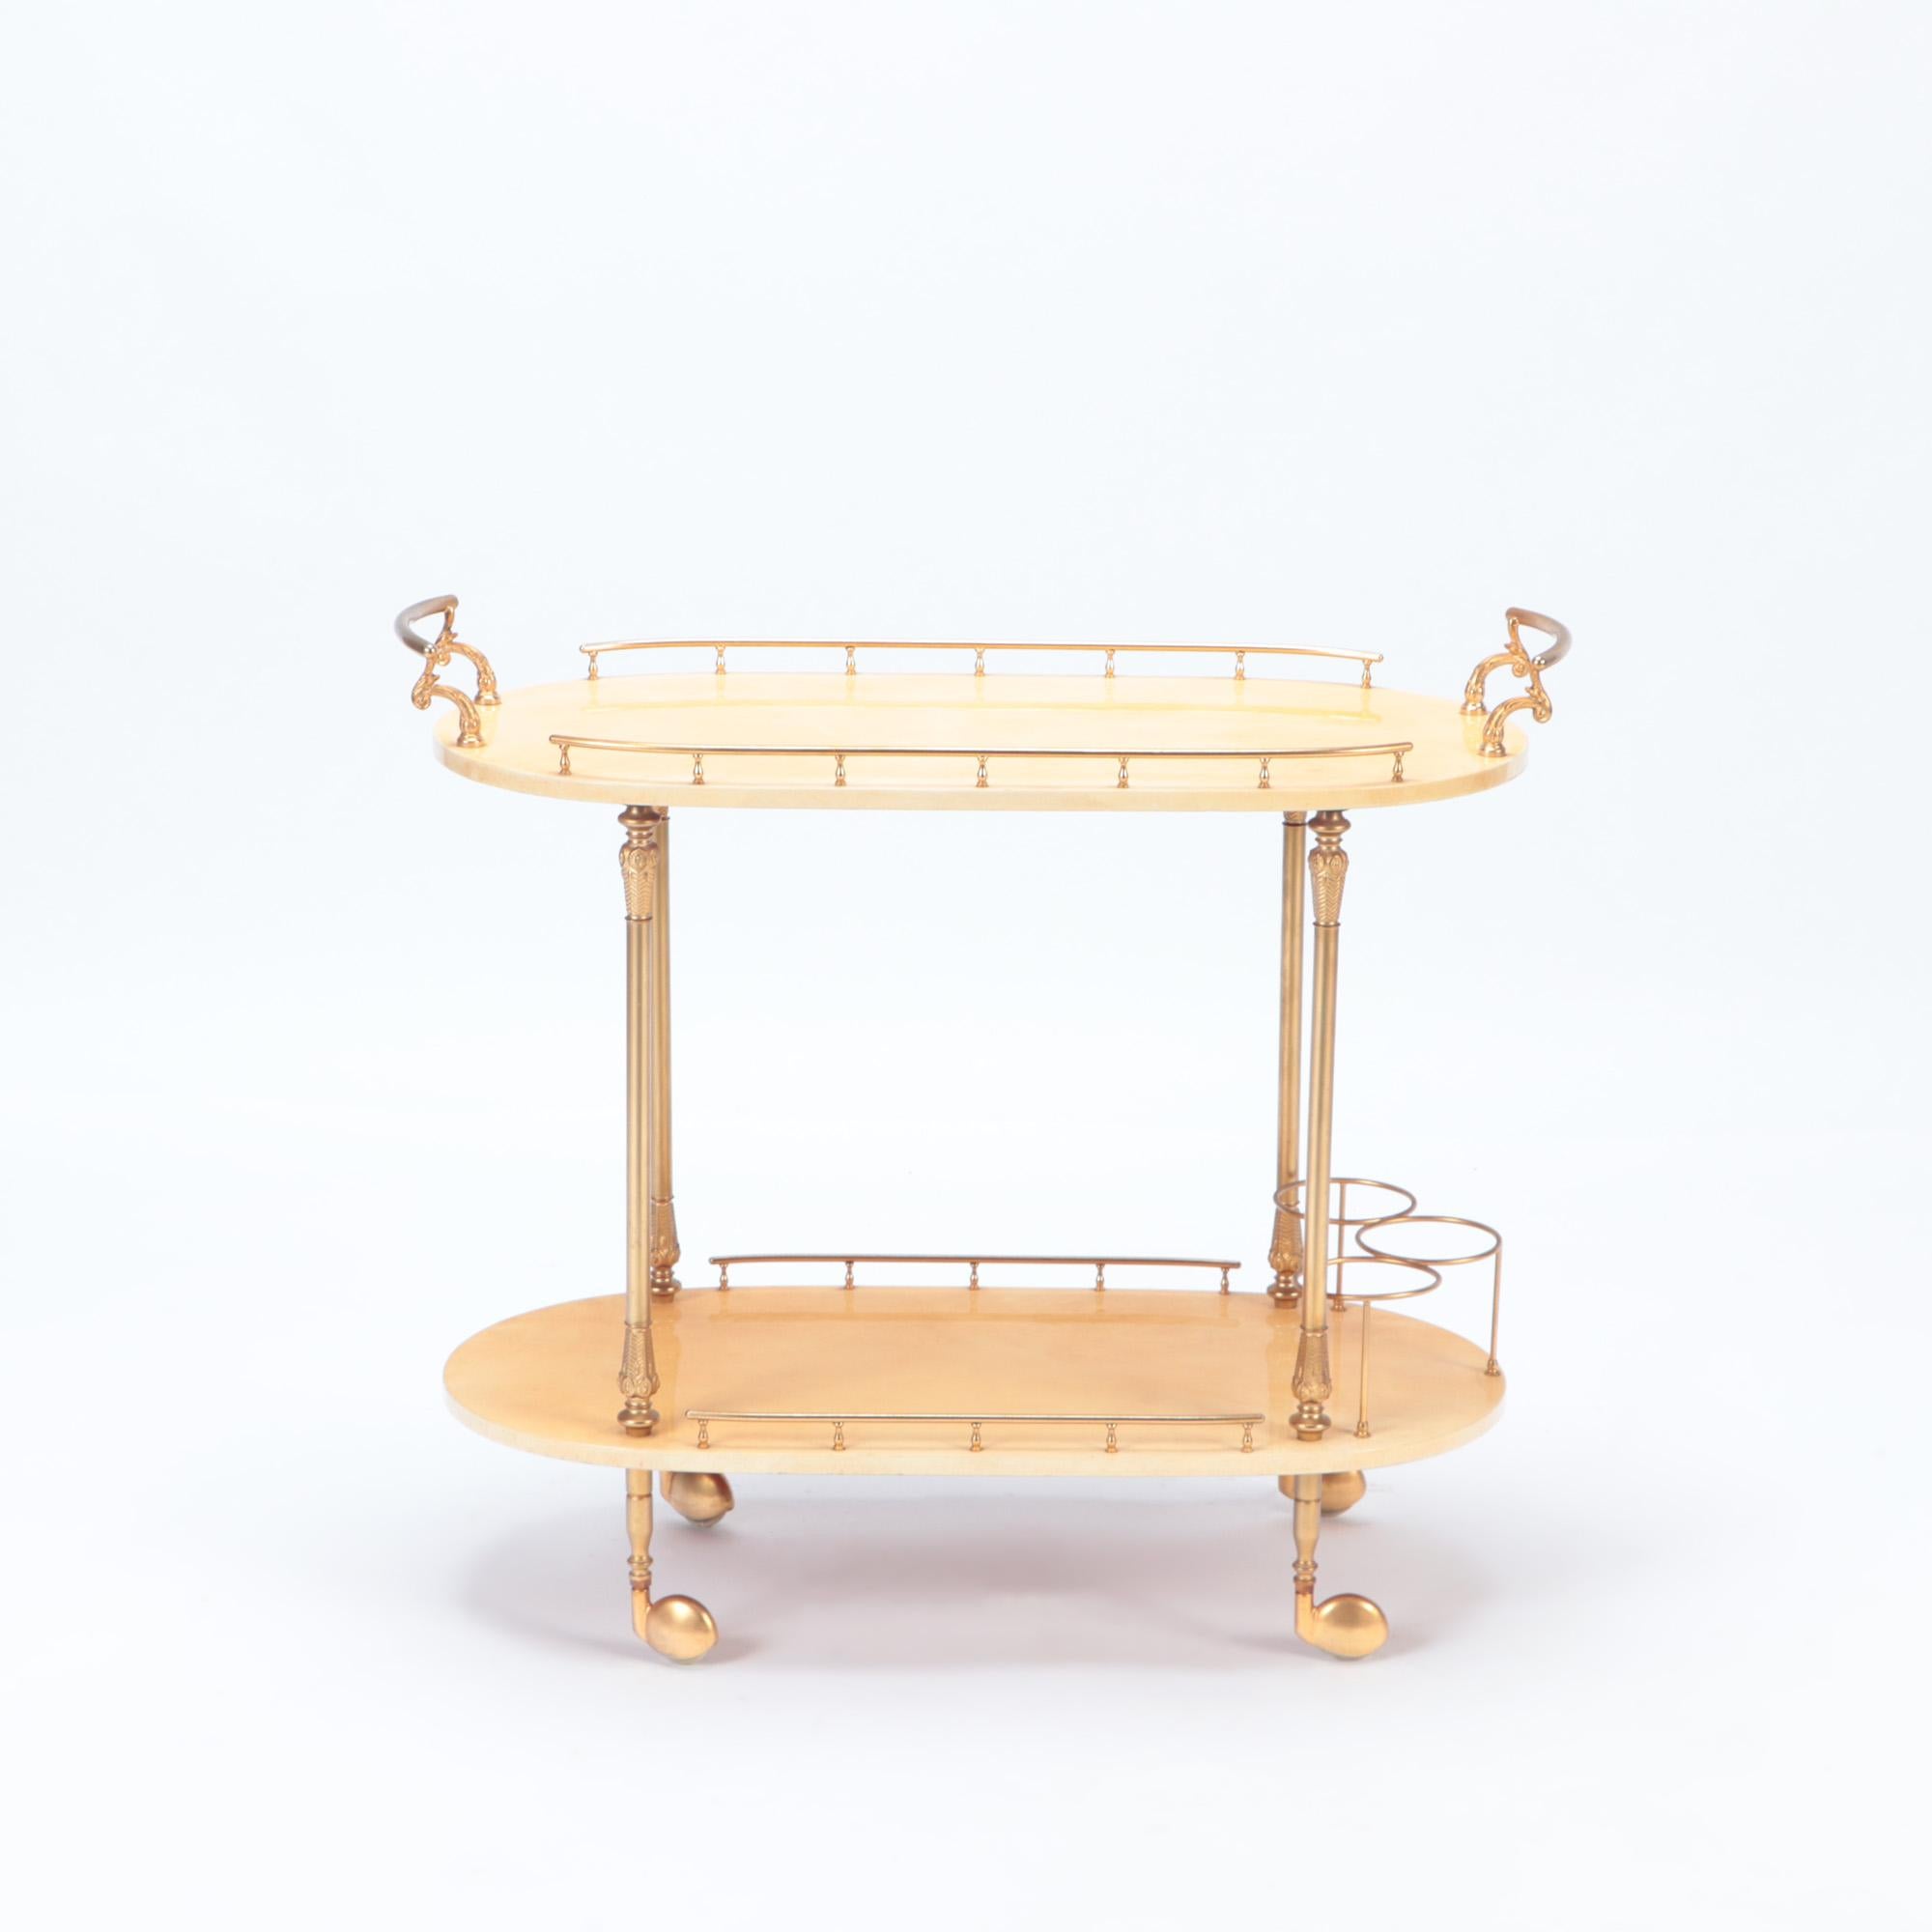 A Mid-Century Modern bar cart/trolley by Aldo Tura. Two lacquered goatskin tiered shelves with brass mounts on four caster feet. Circa 1960.